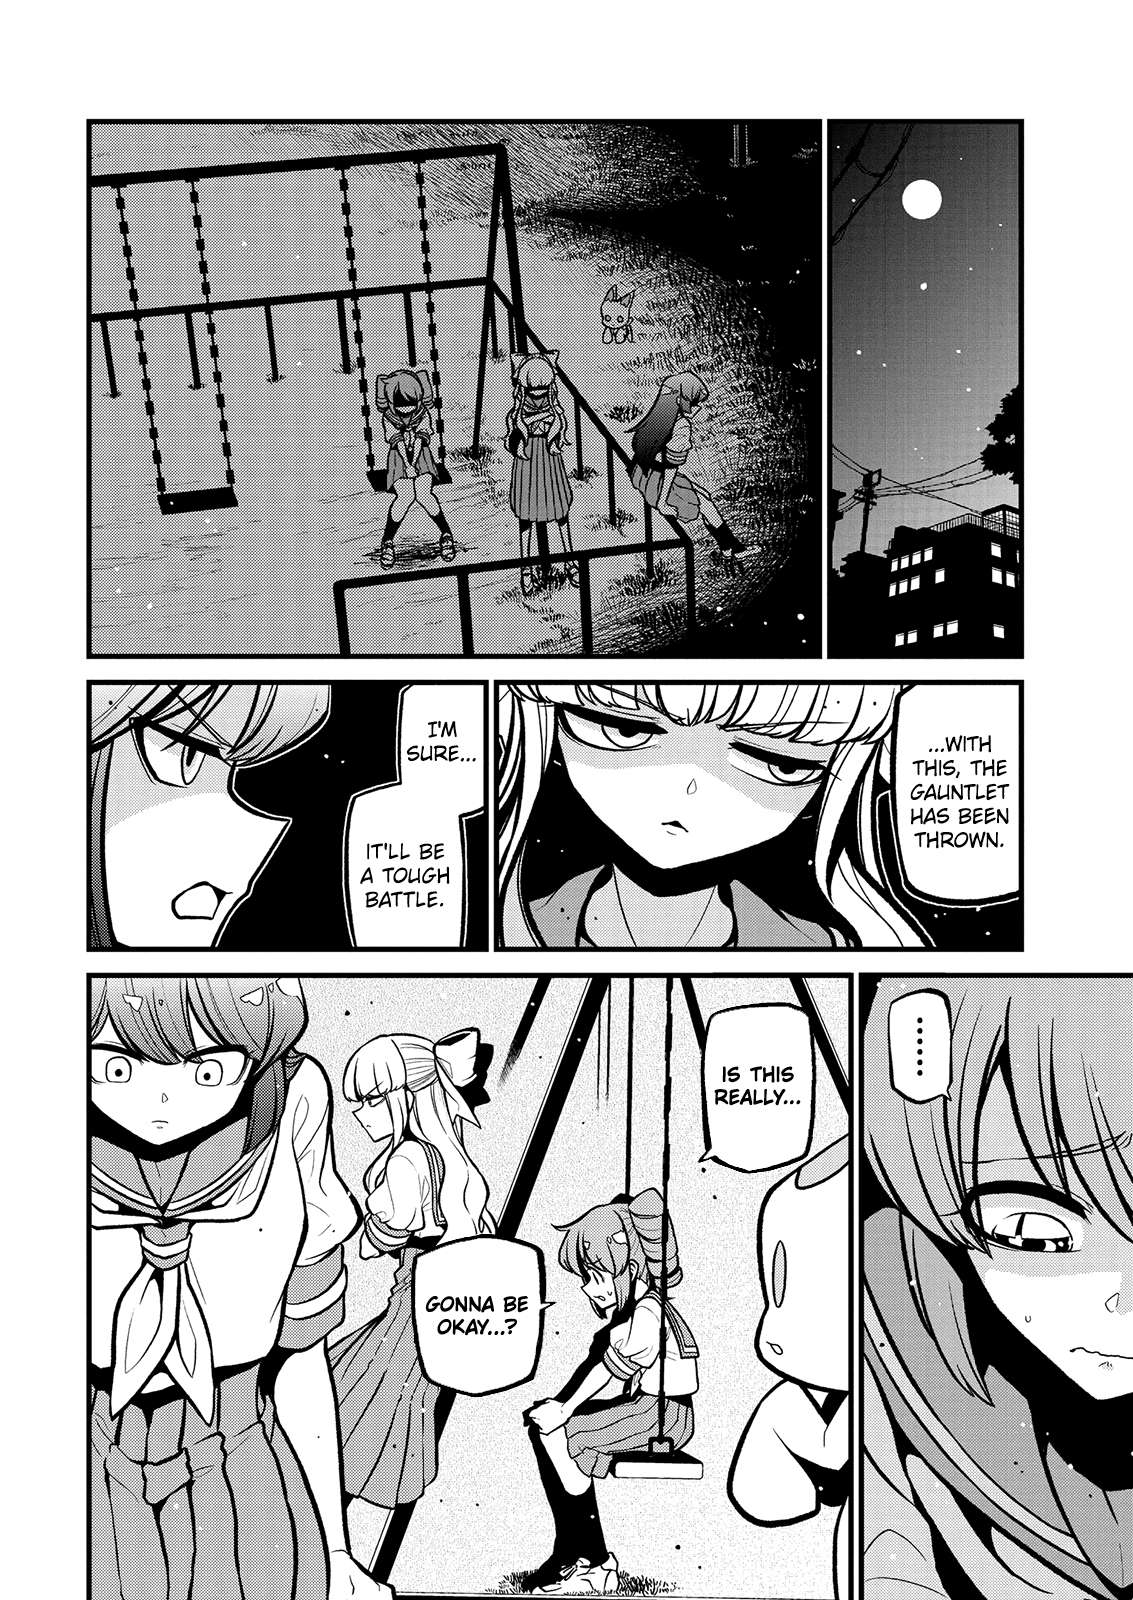 Gushing over Magical Girls - chapter 34 - #4